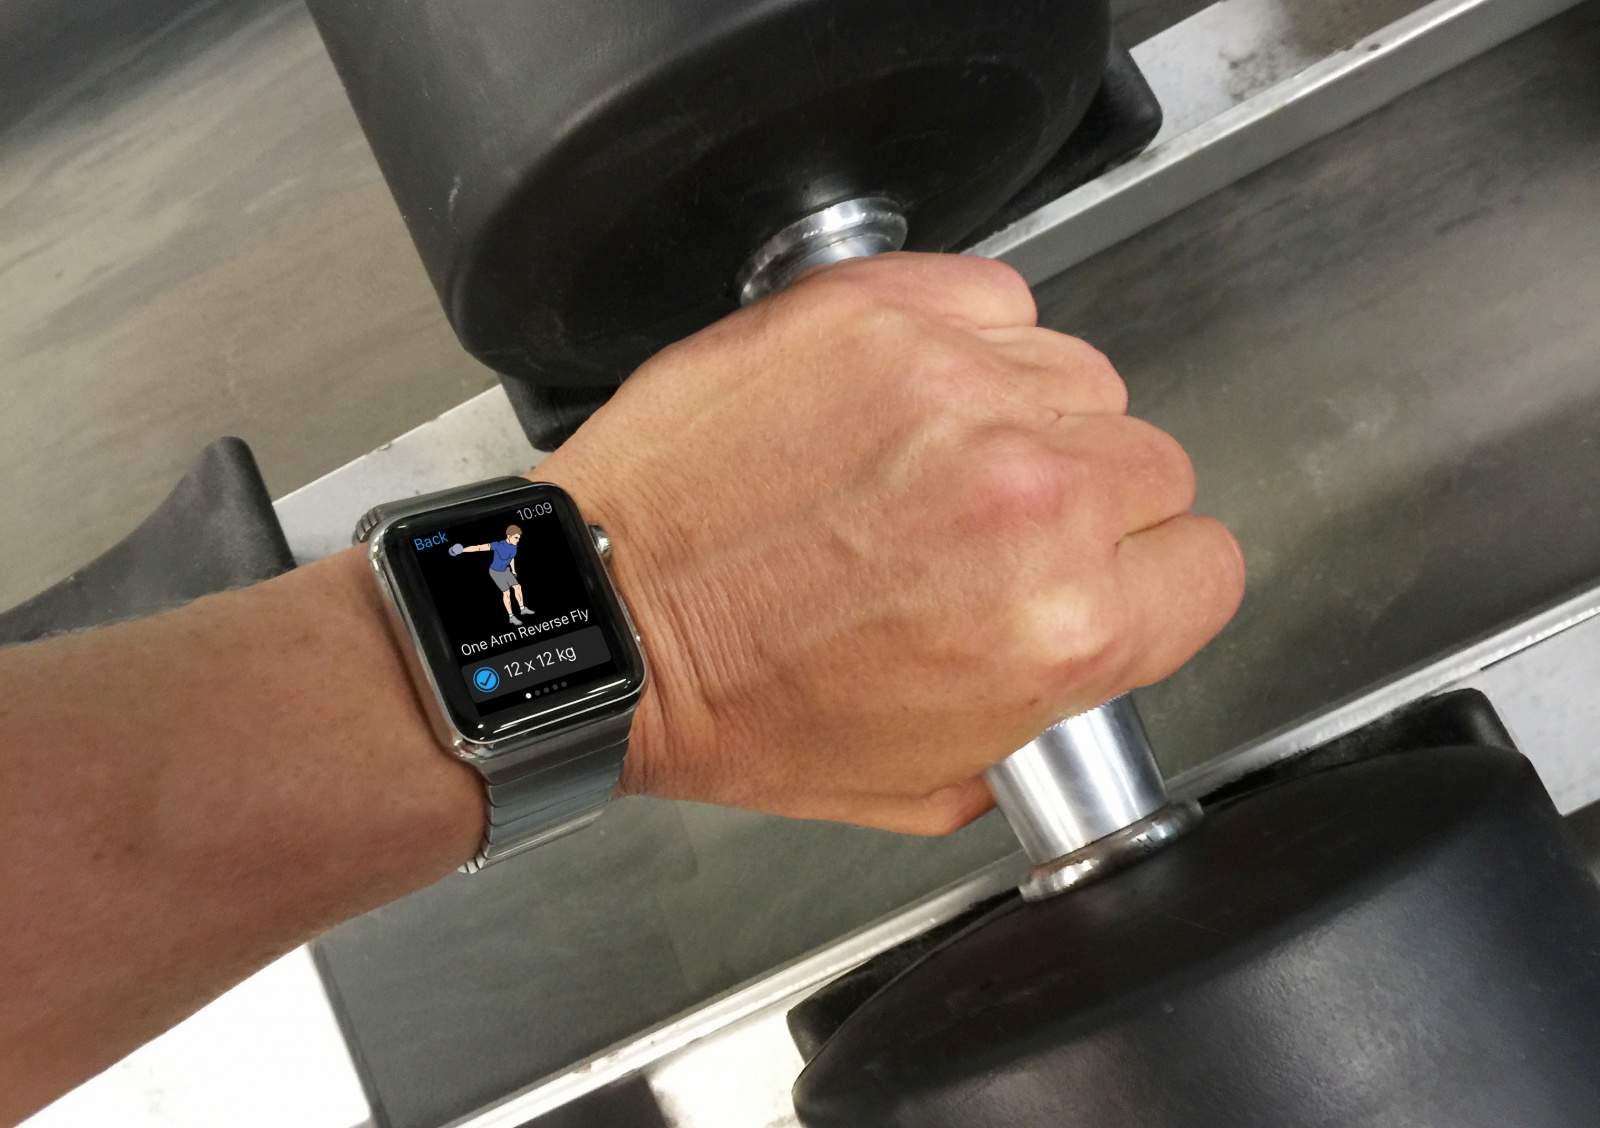 Stainless steel Apple Watch meets pumping iron.